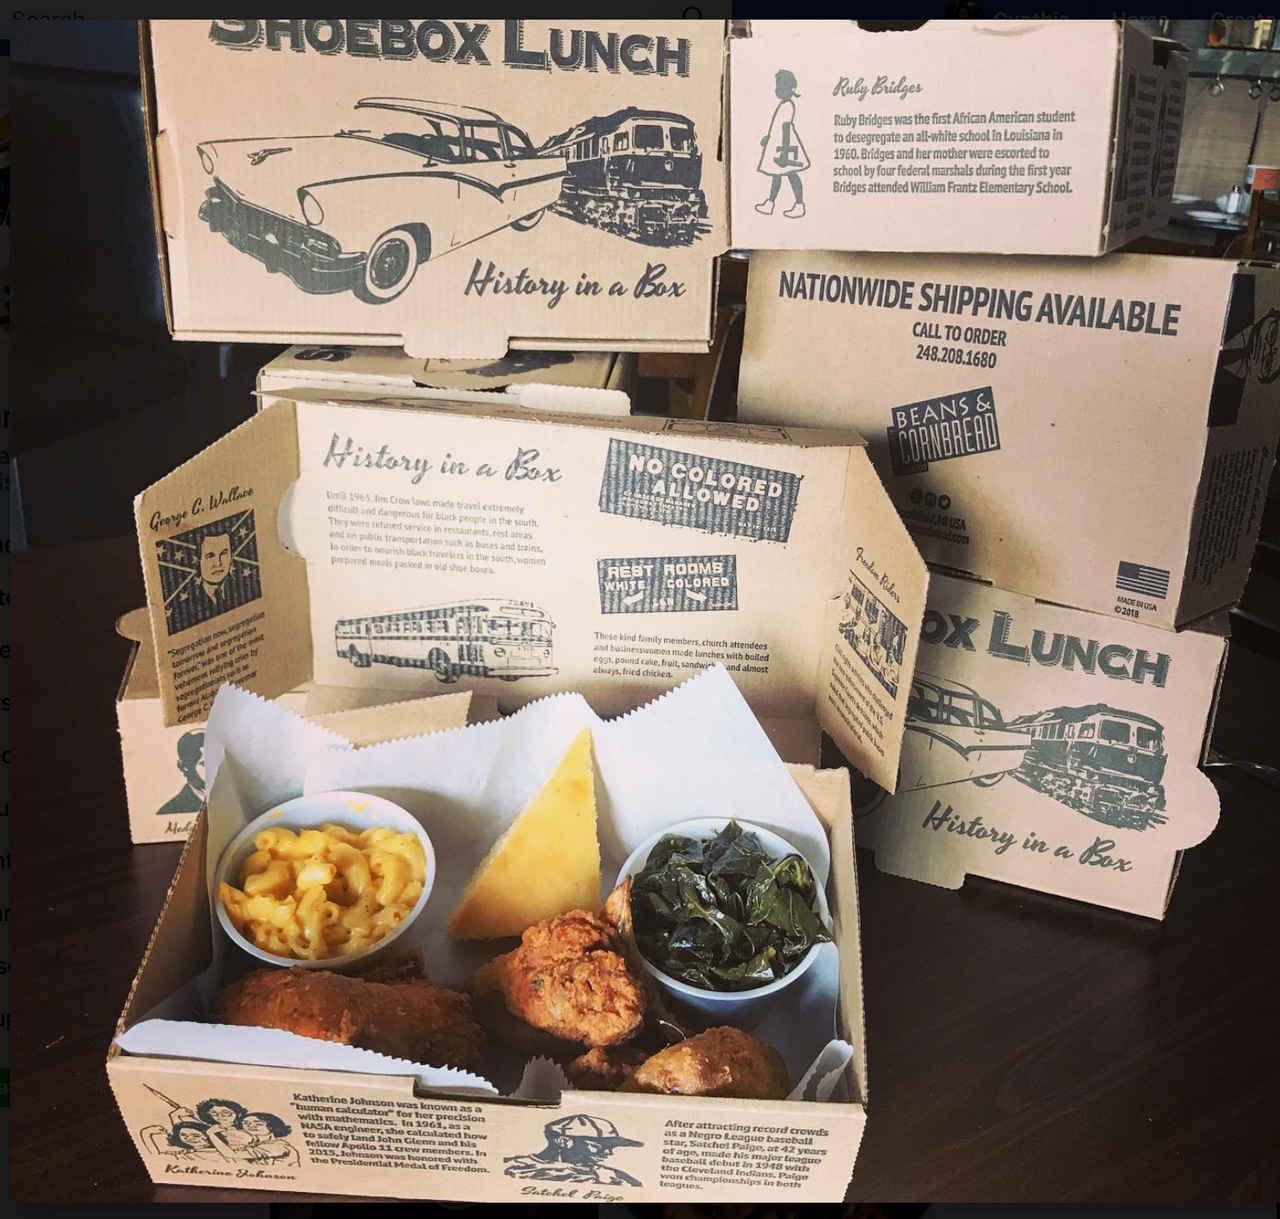 The shoebox lunch has become a symbol of resilience.